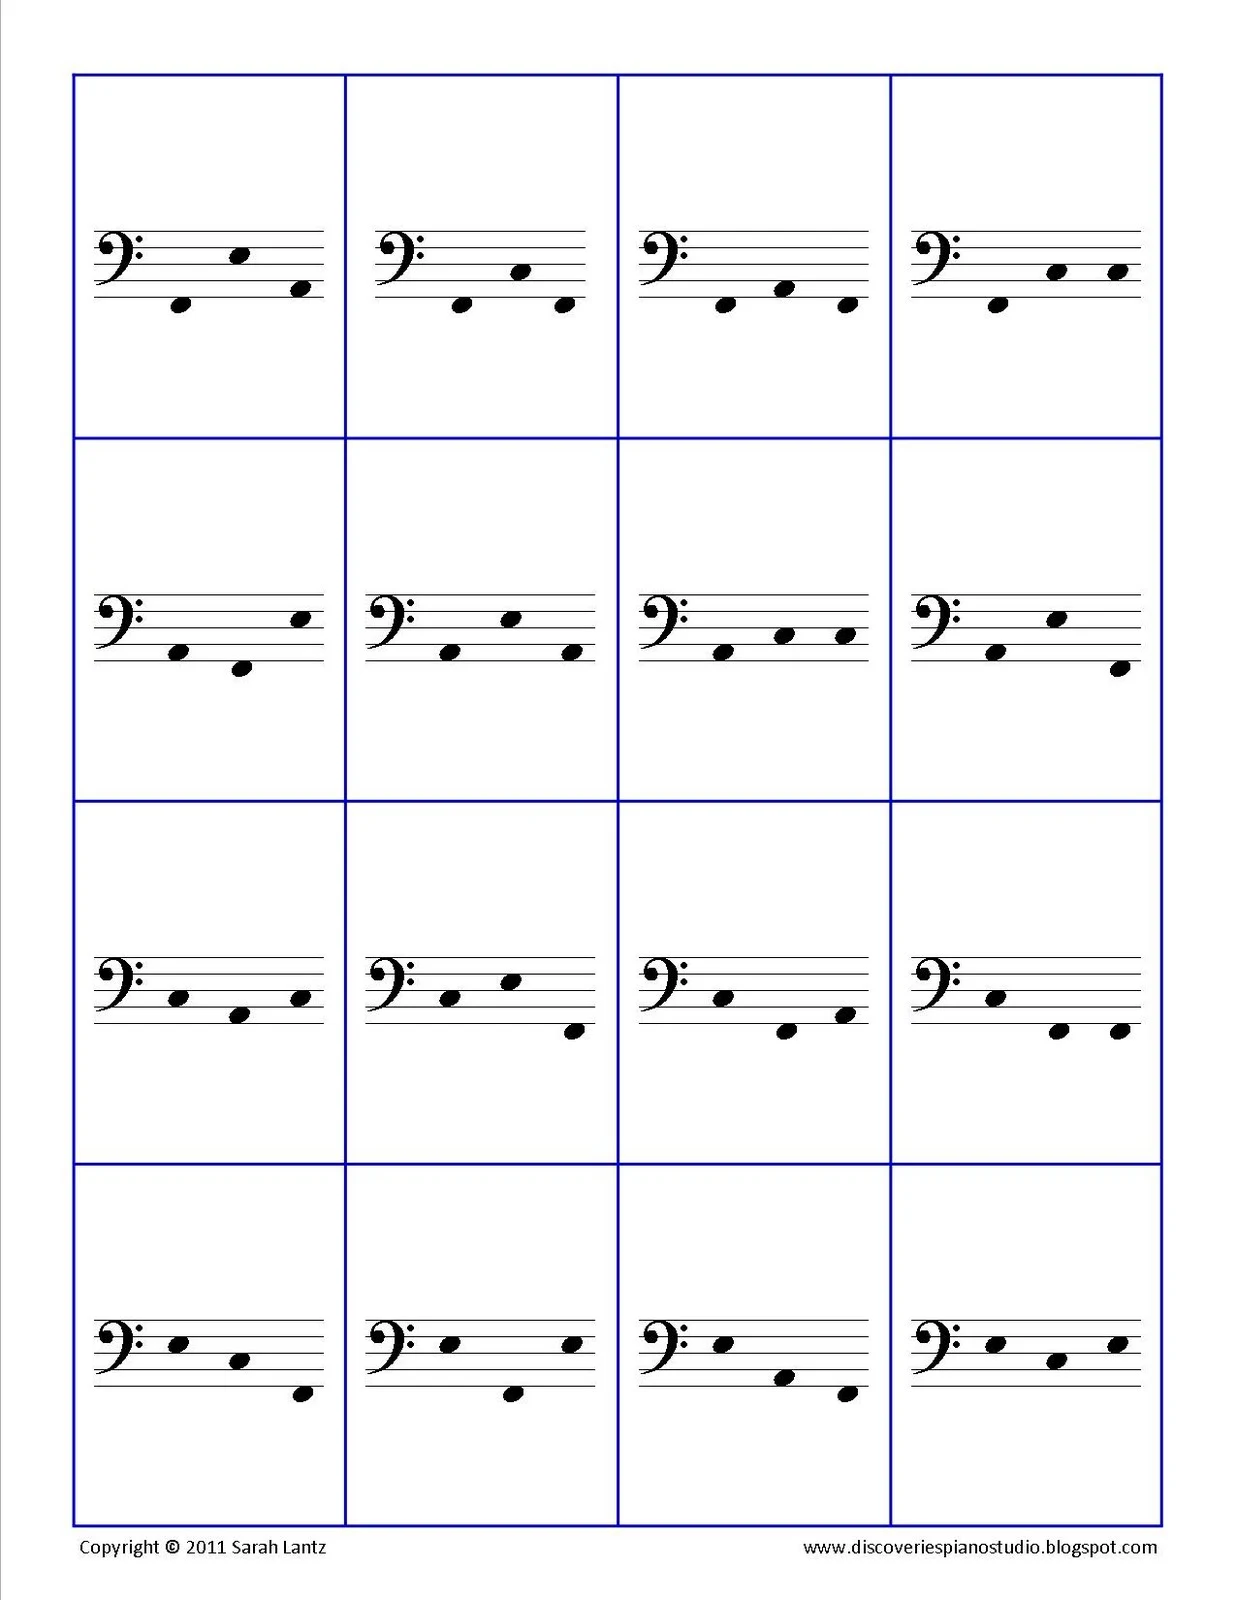 Discoveries Piano Studio FACE Flashcards for Treble and Bass Clef